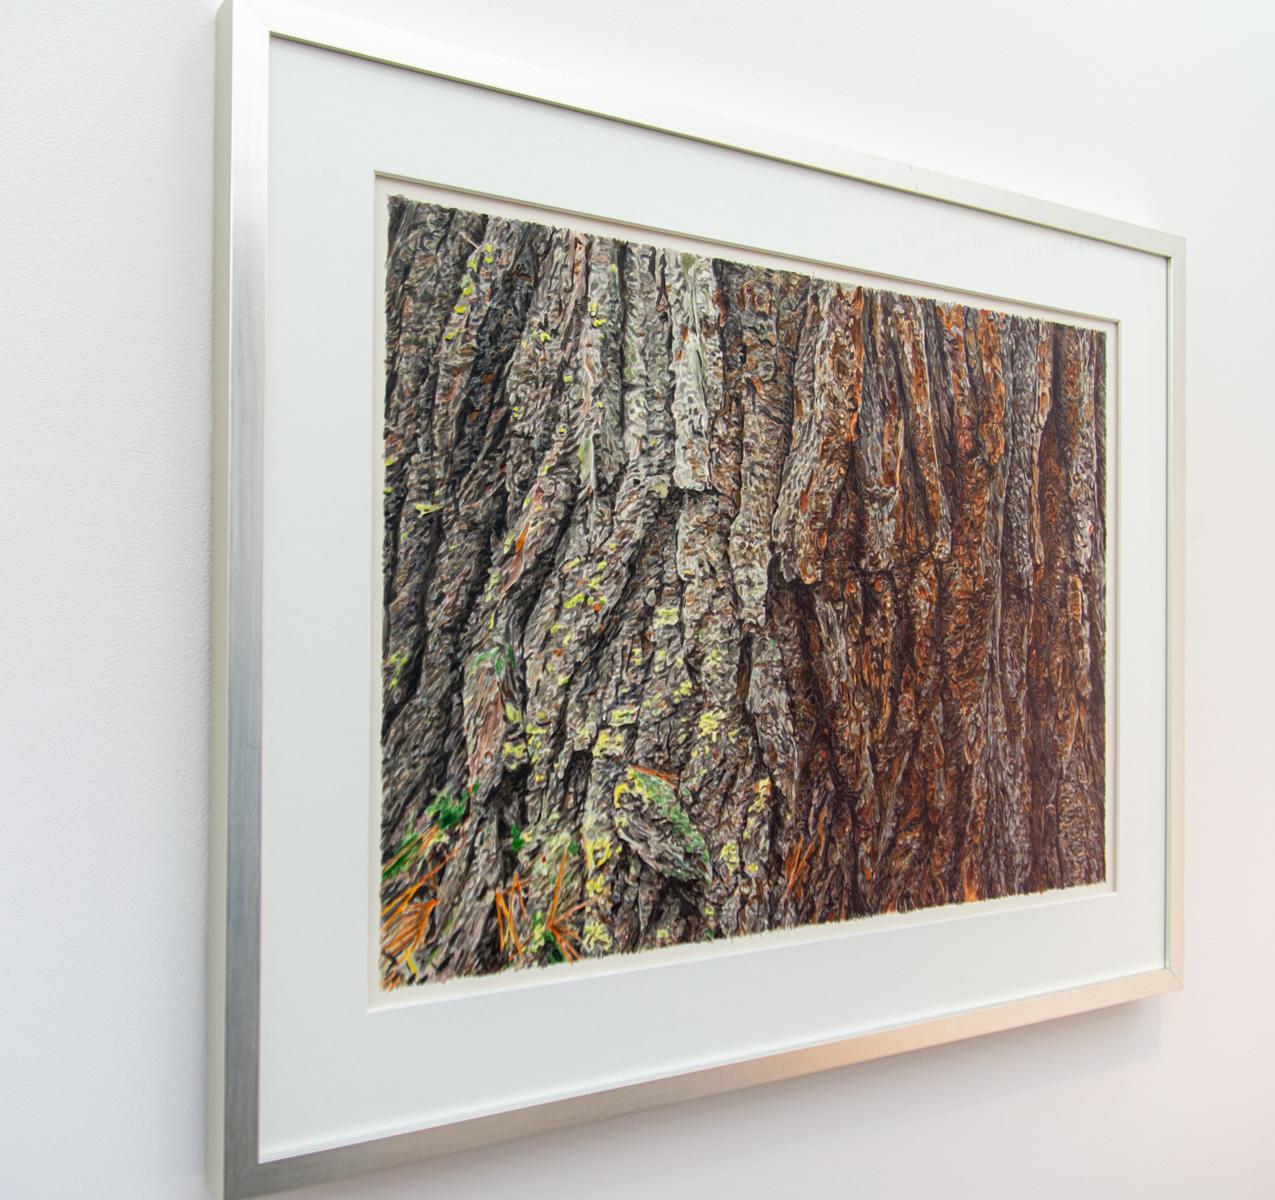 White Pine - detailed, natural, realism, tree portrait, watercolor on paper - Realist Painting by Robert Wiens